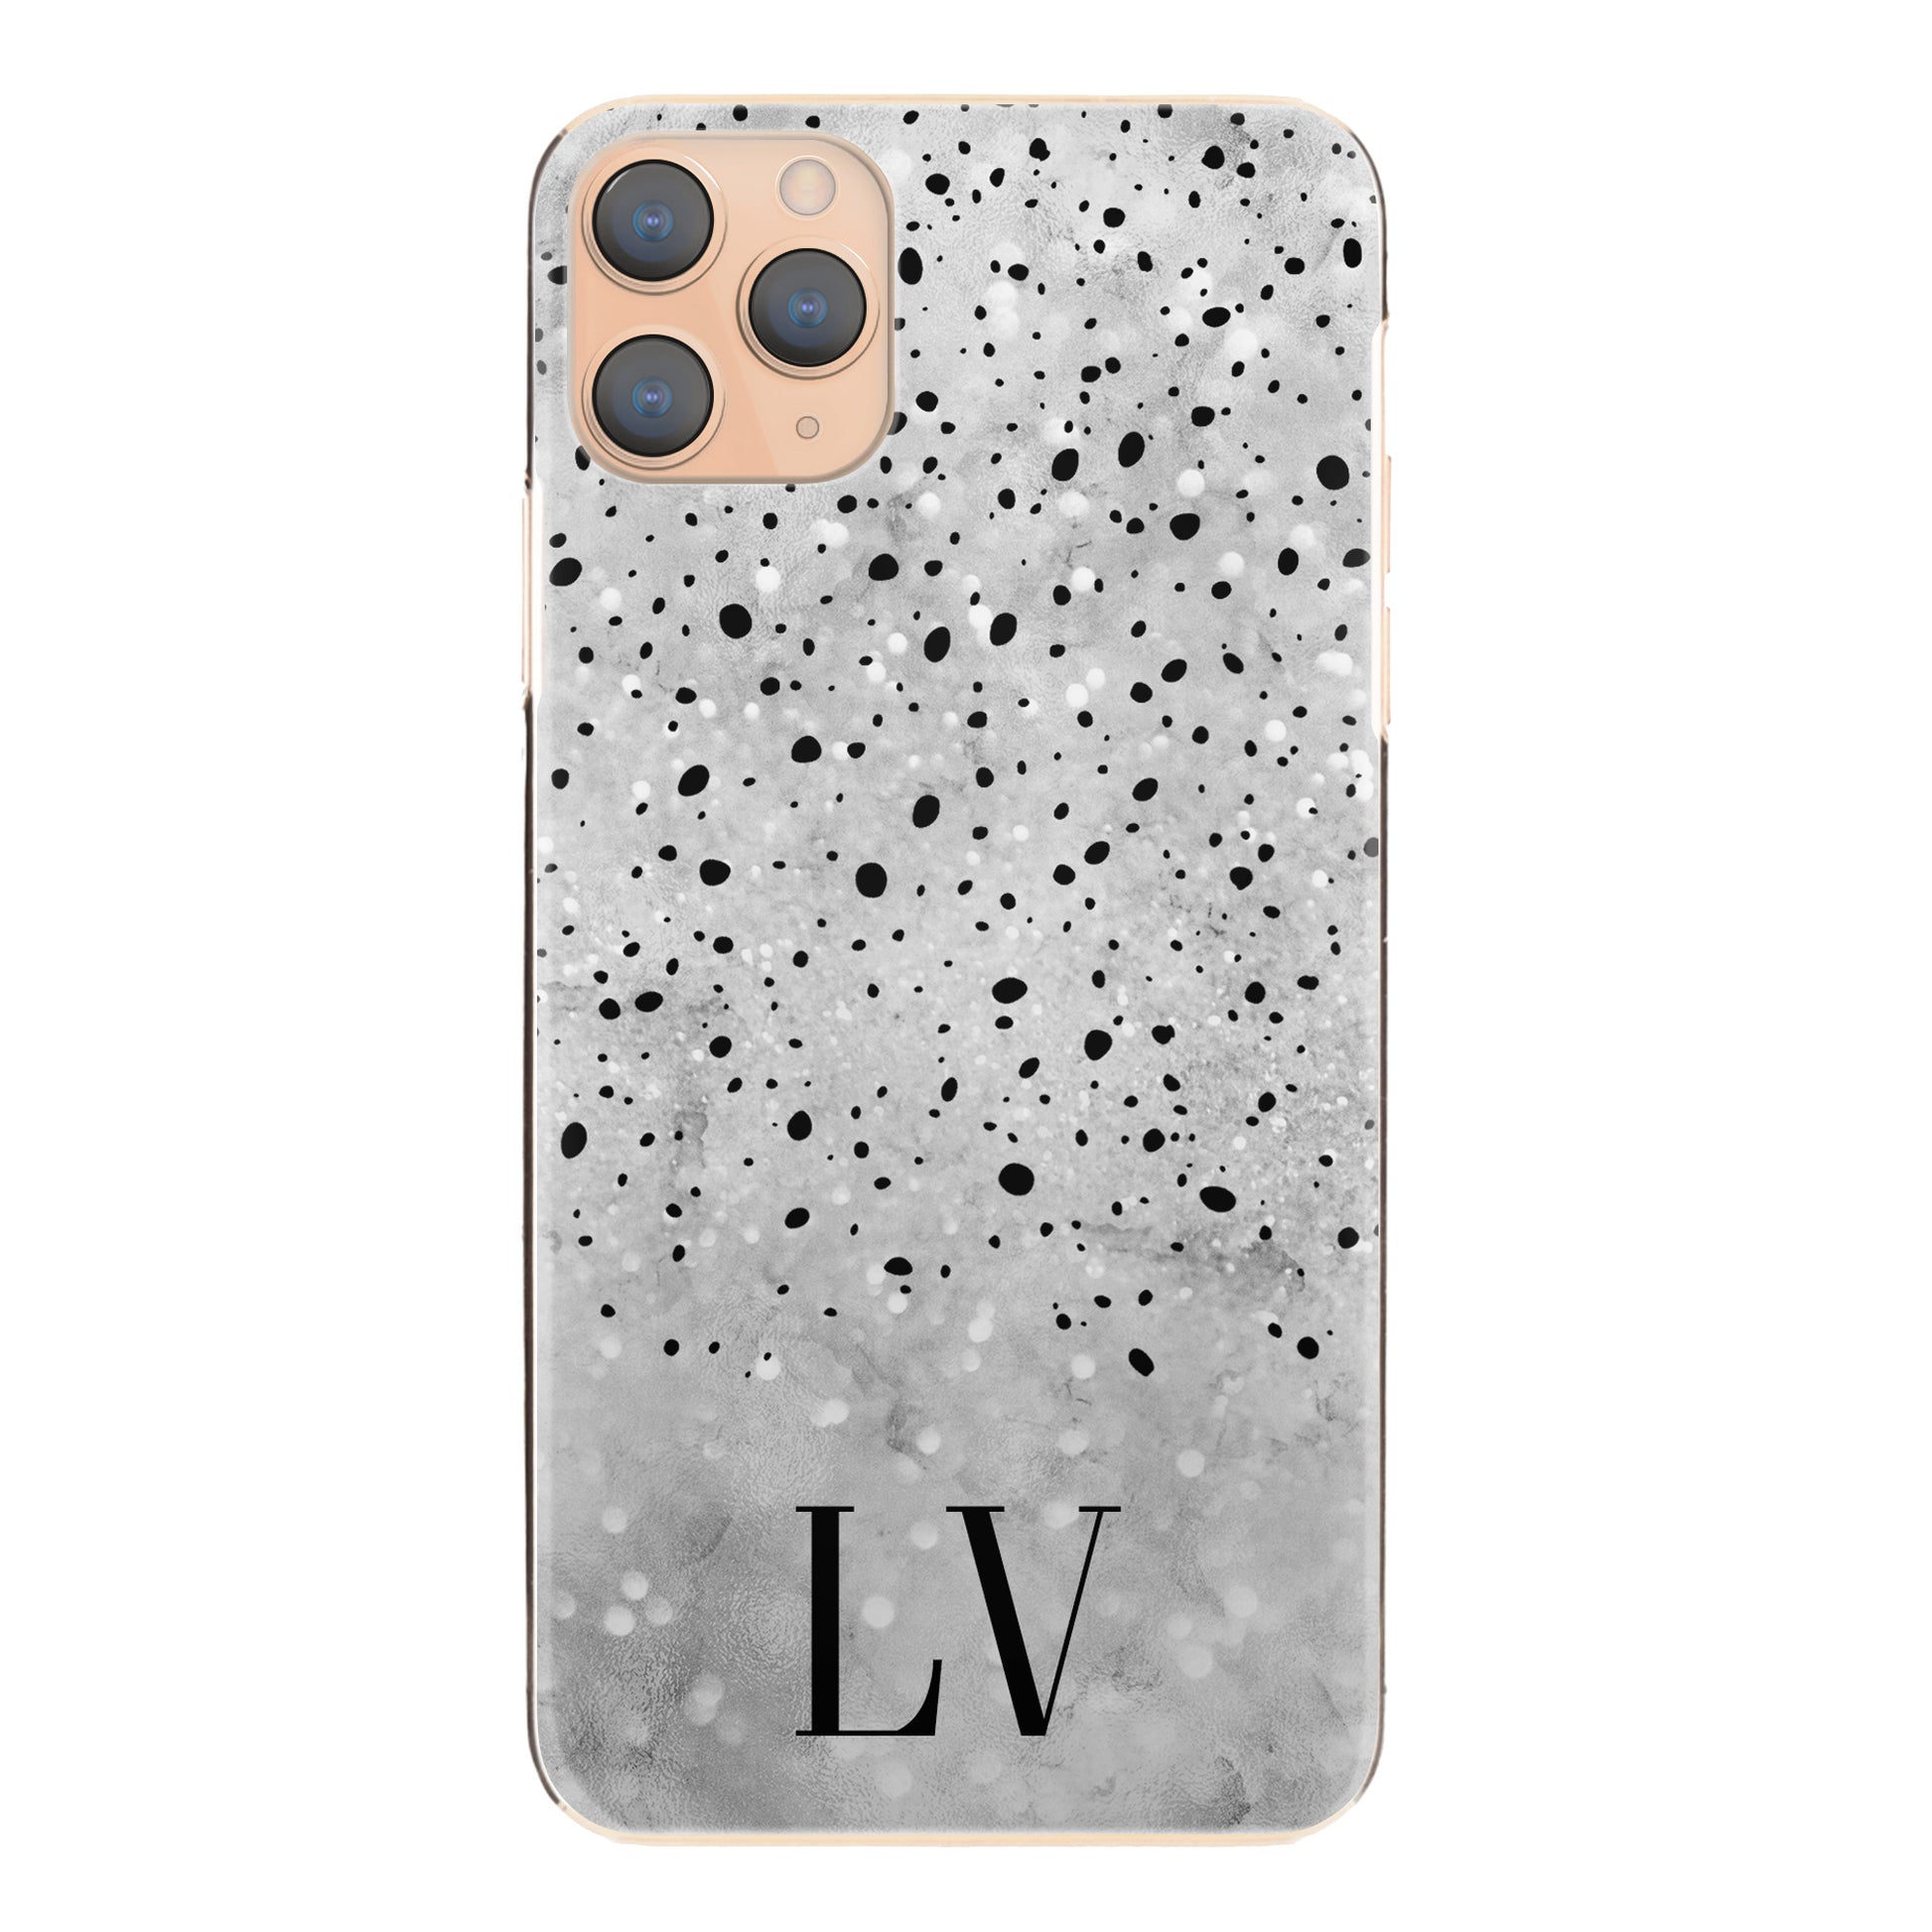 Personalised HTC Phone Hard Case with Classy Initials on Textured Grey and Black Dots